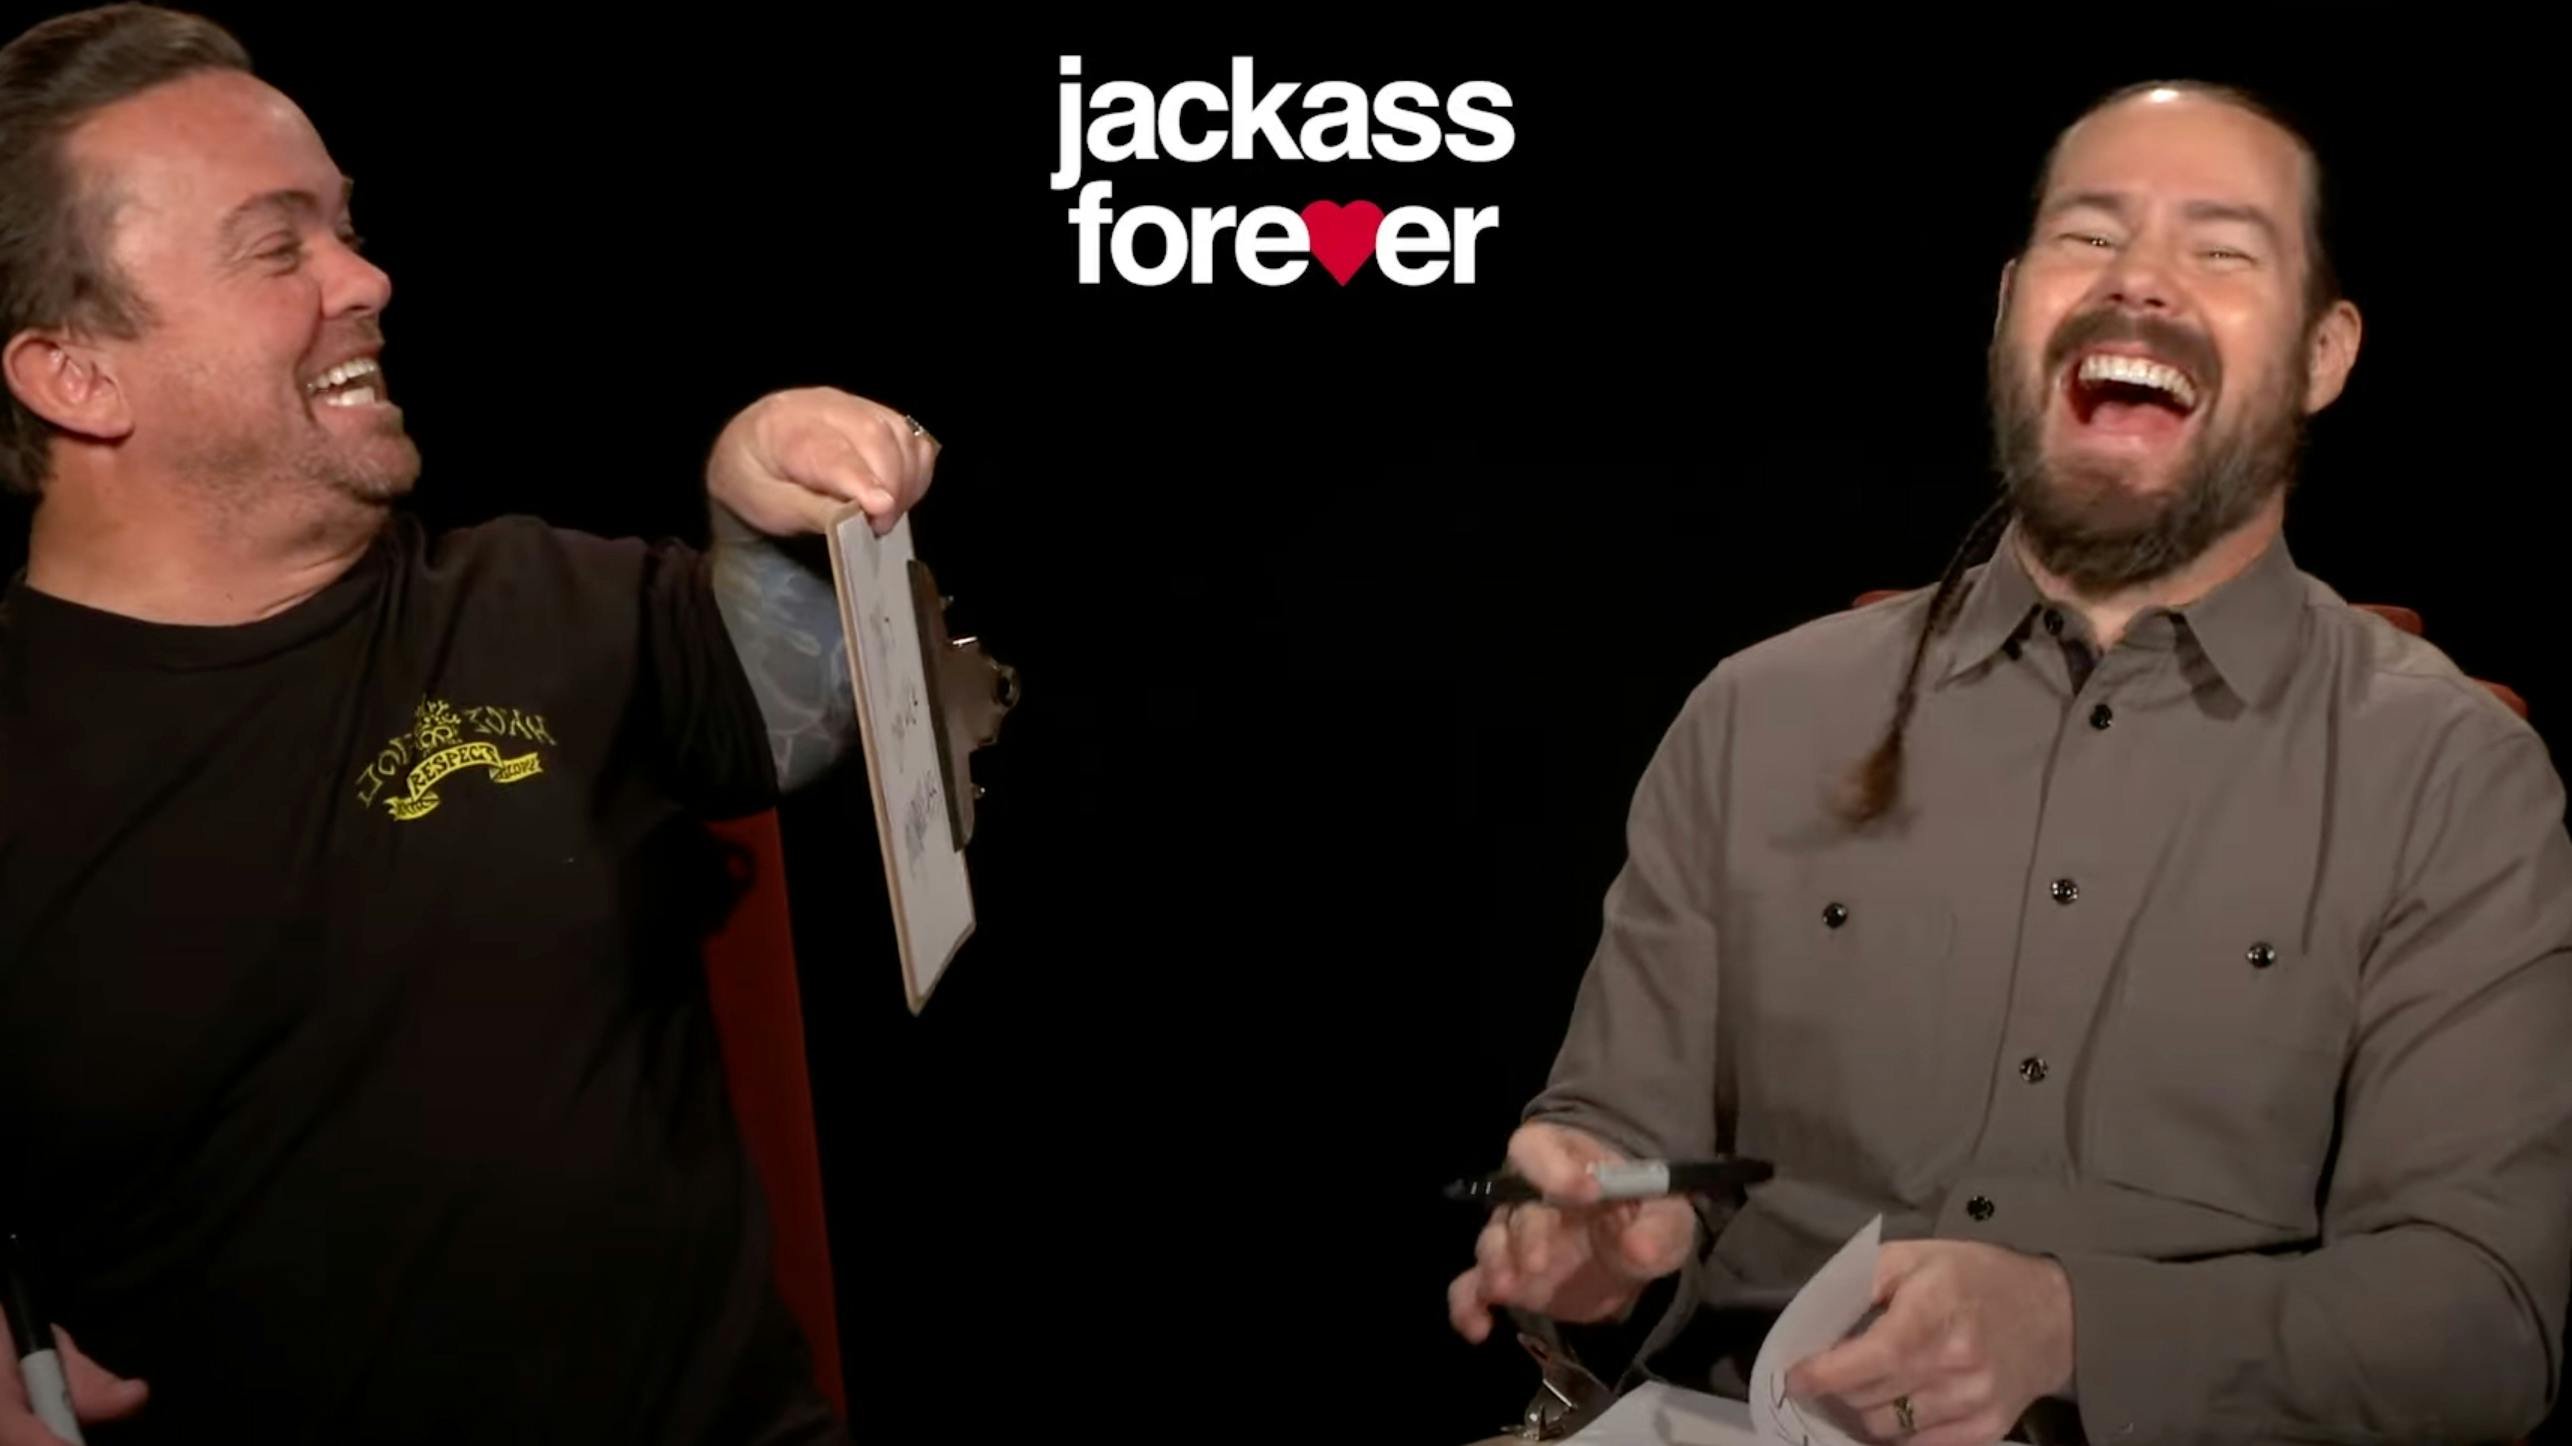 How well do Jackass’ Wee Man and Chris Pontius know each other?